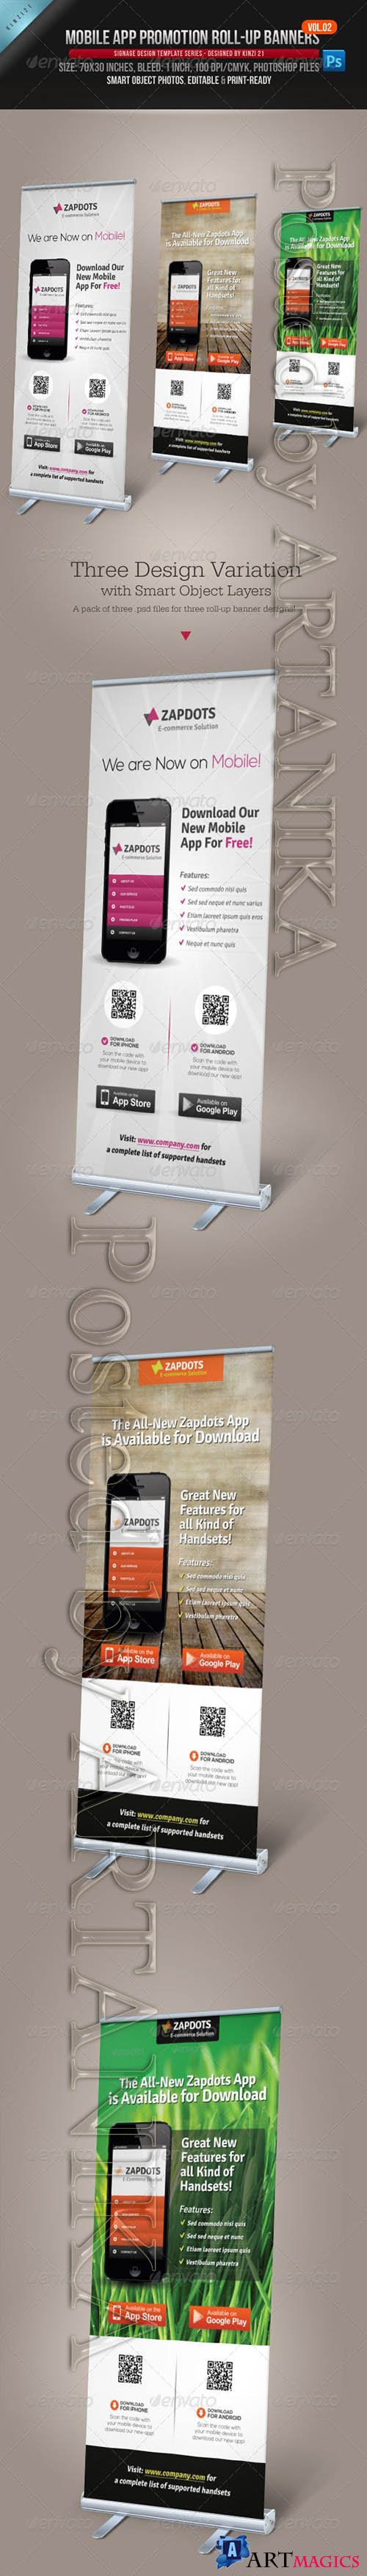 GraphicRiver - Mobile App Promotion Roll-up Banners Vol.02 4689886